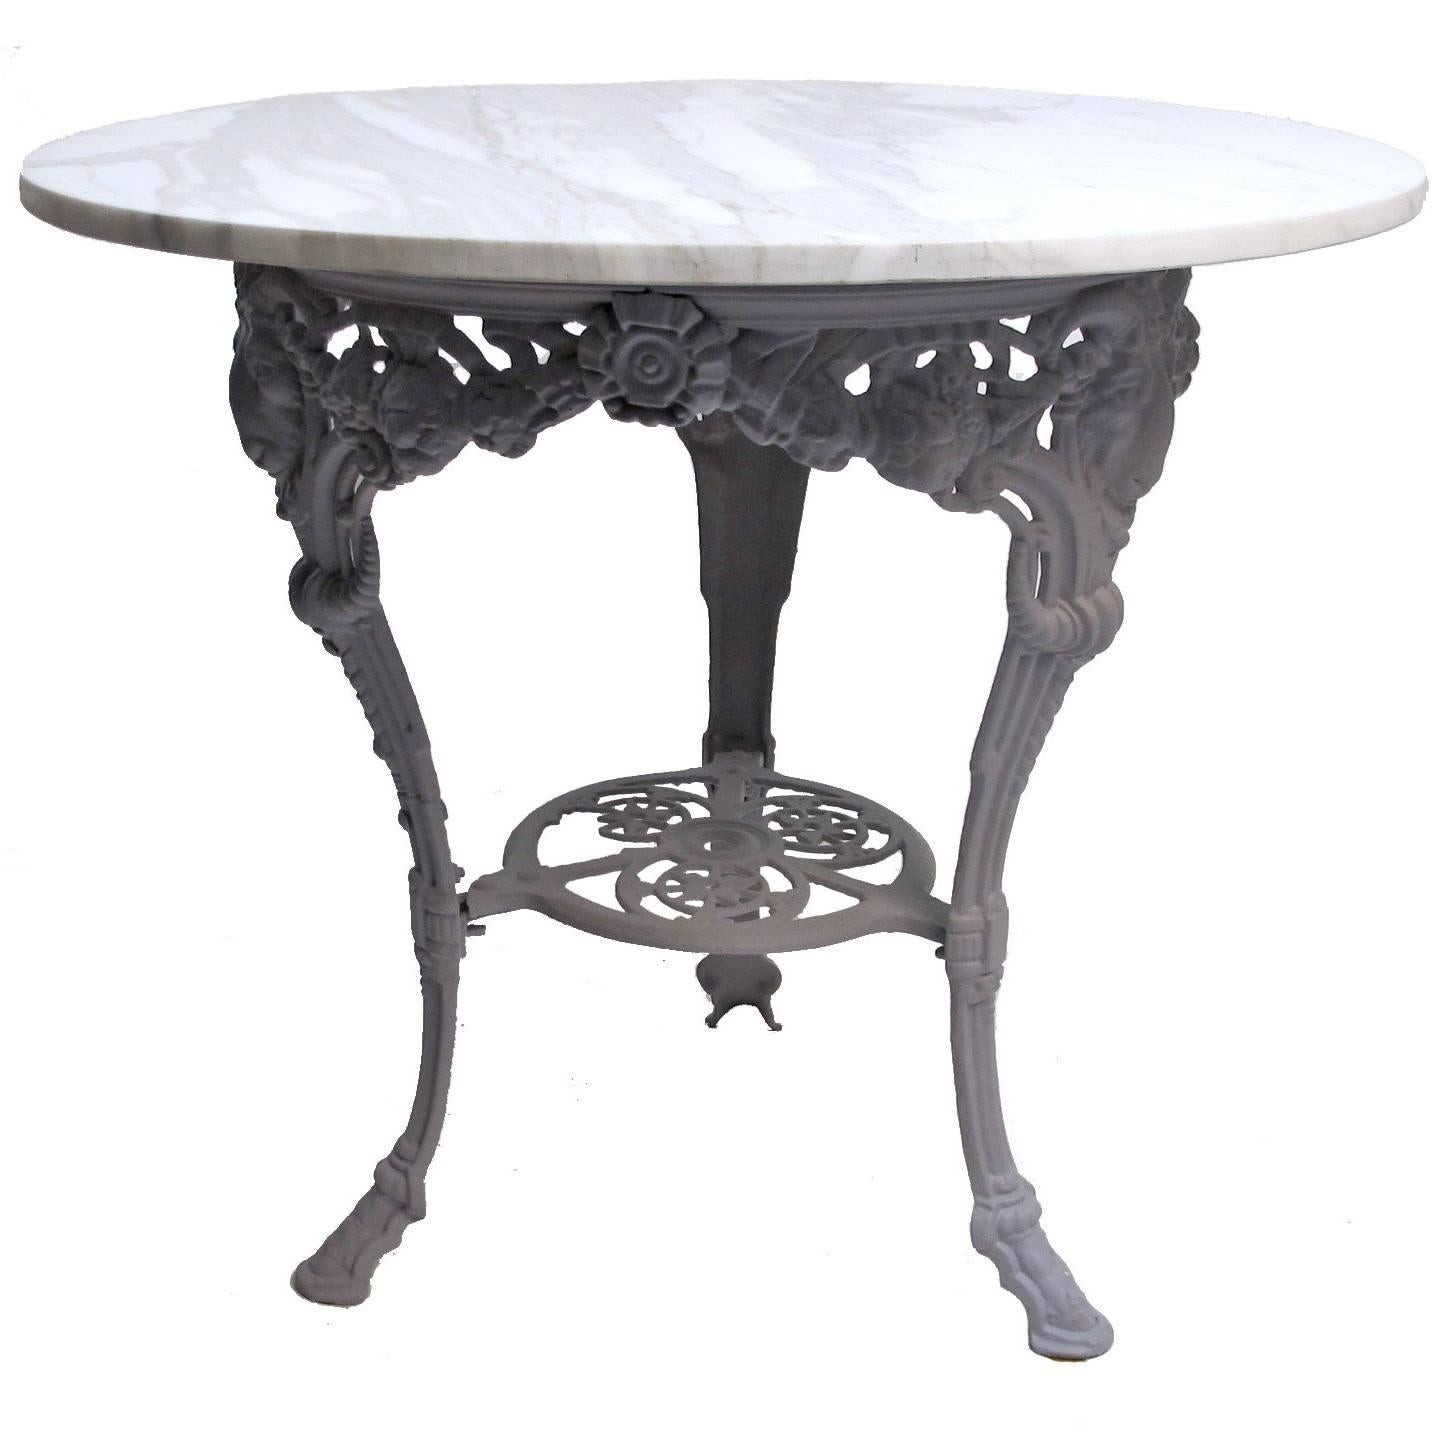 19th Century, French, Garden Cafe Table